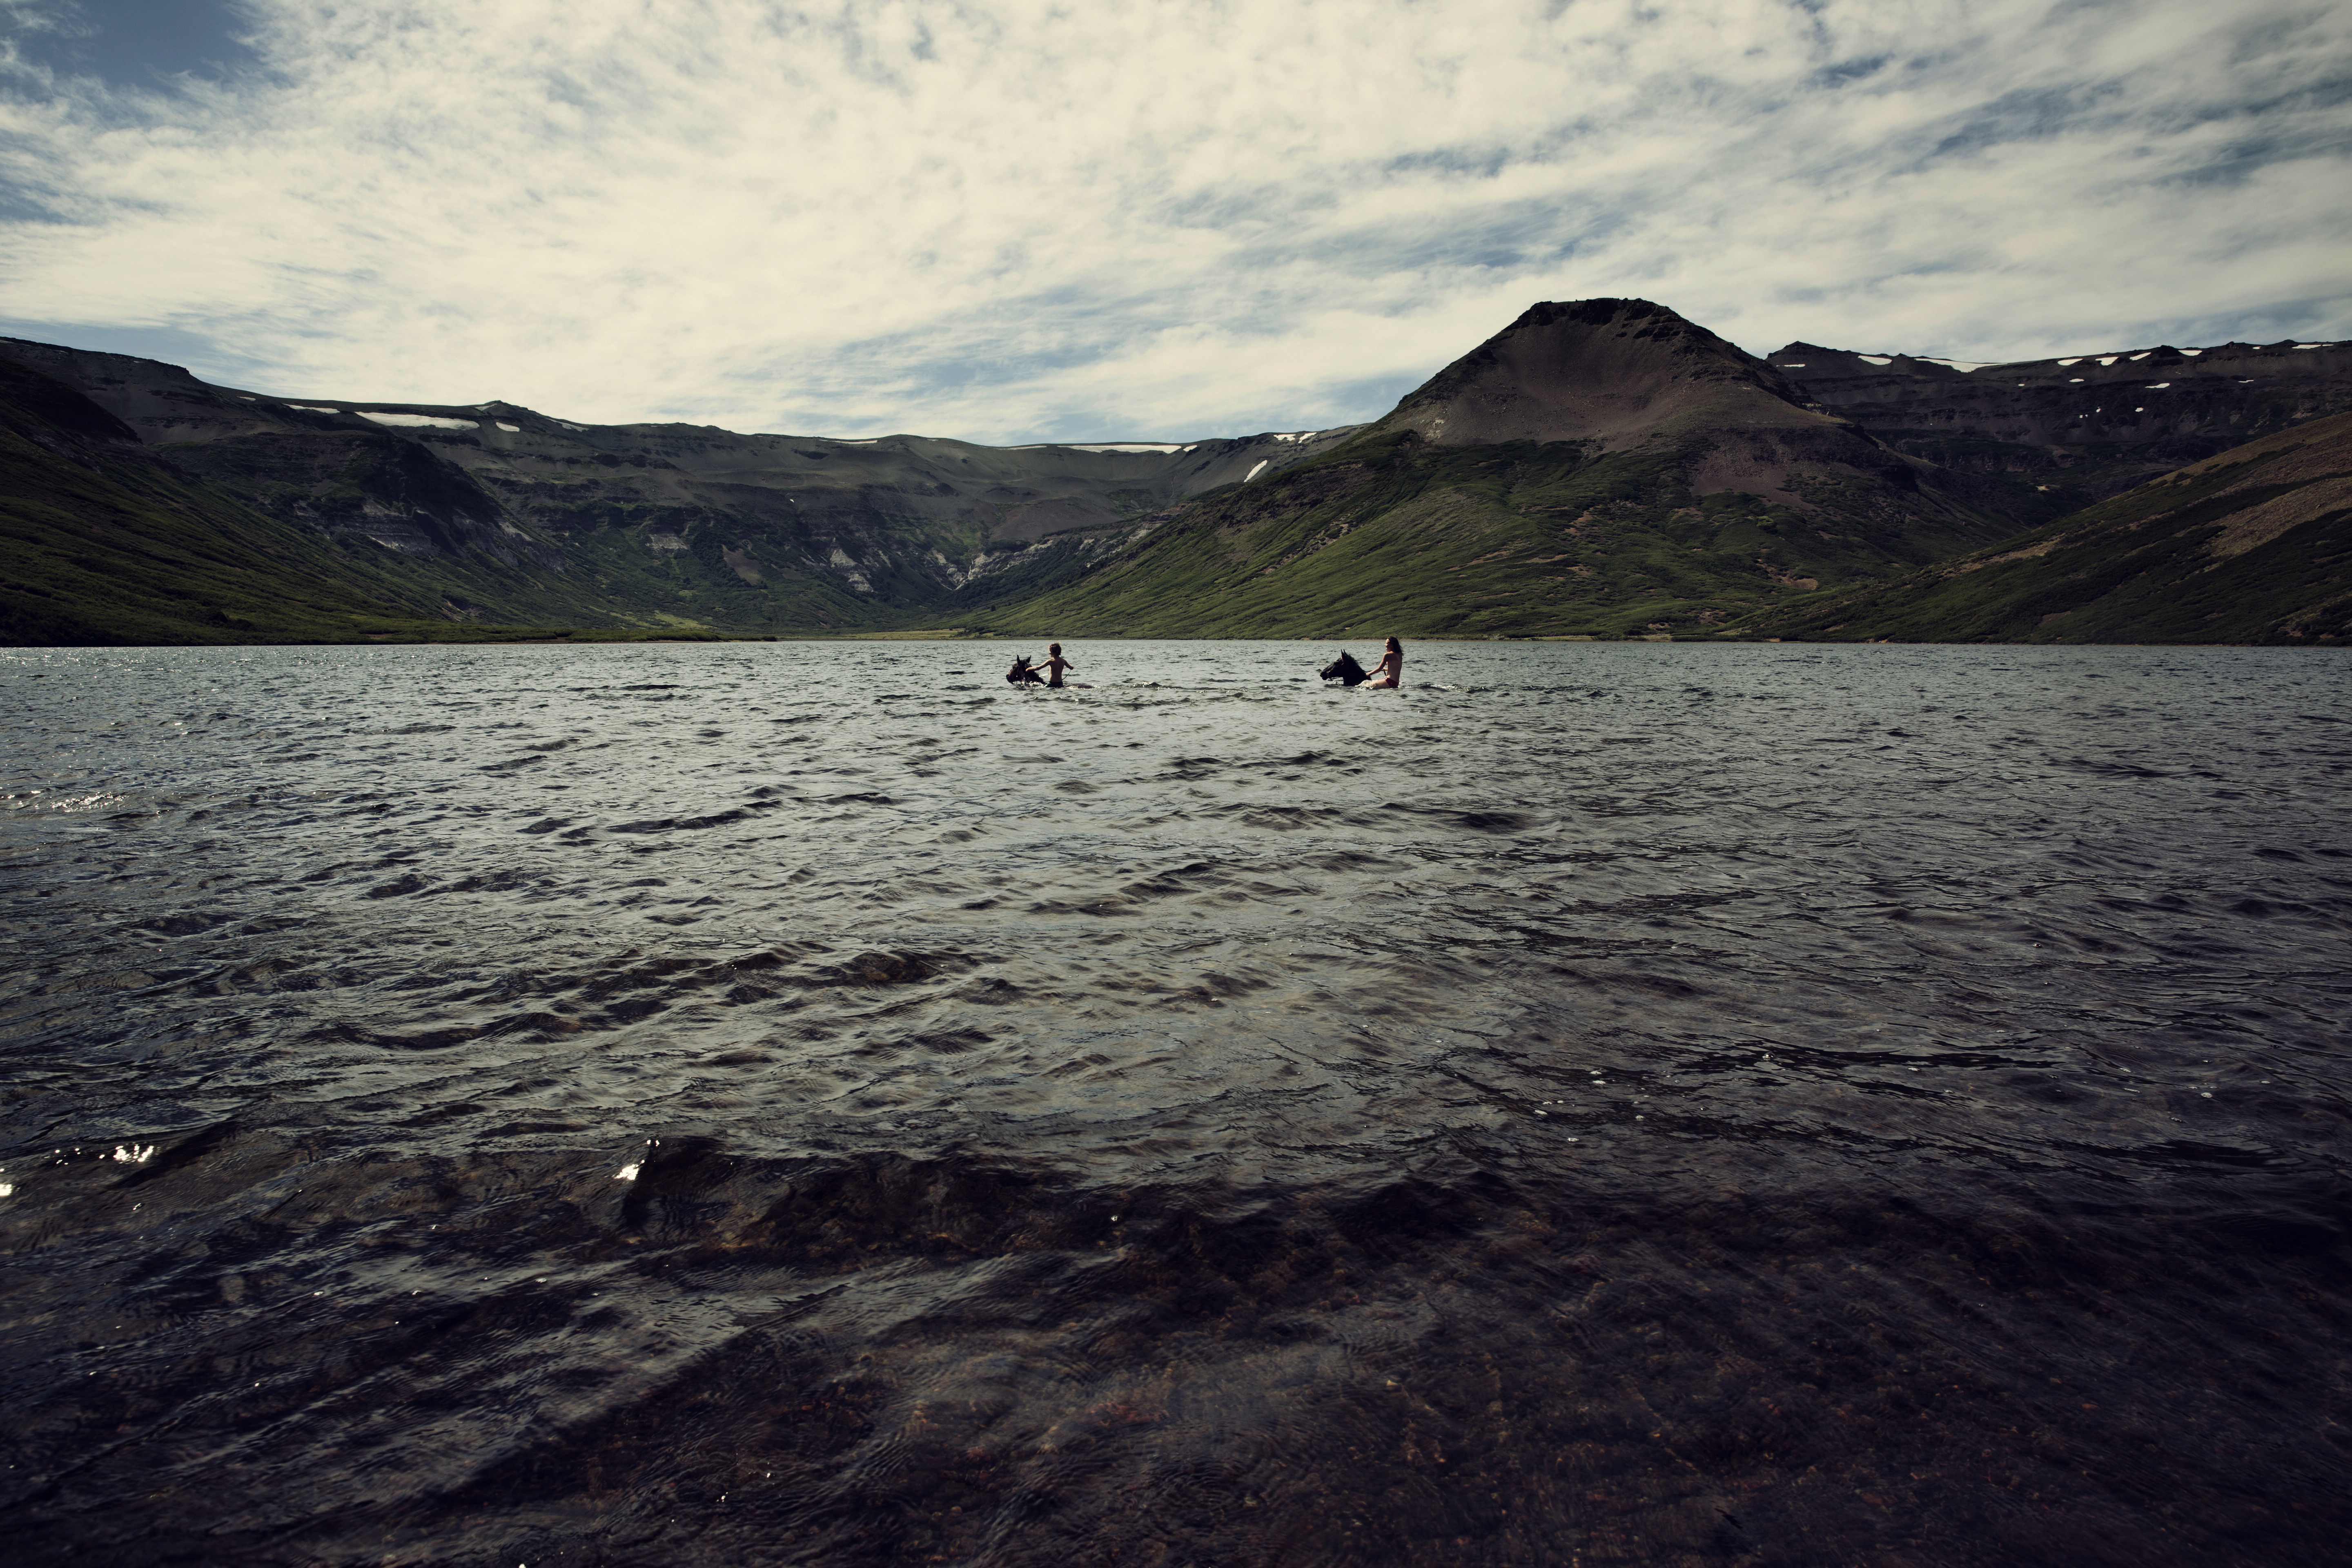 Swimming with horses in an alpine lake in Argentina